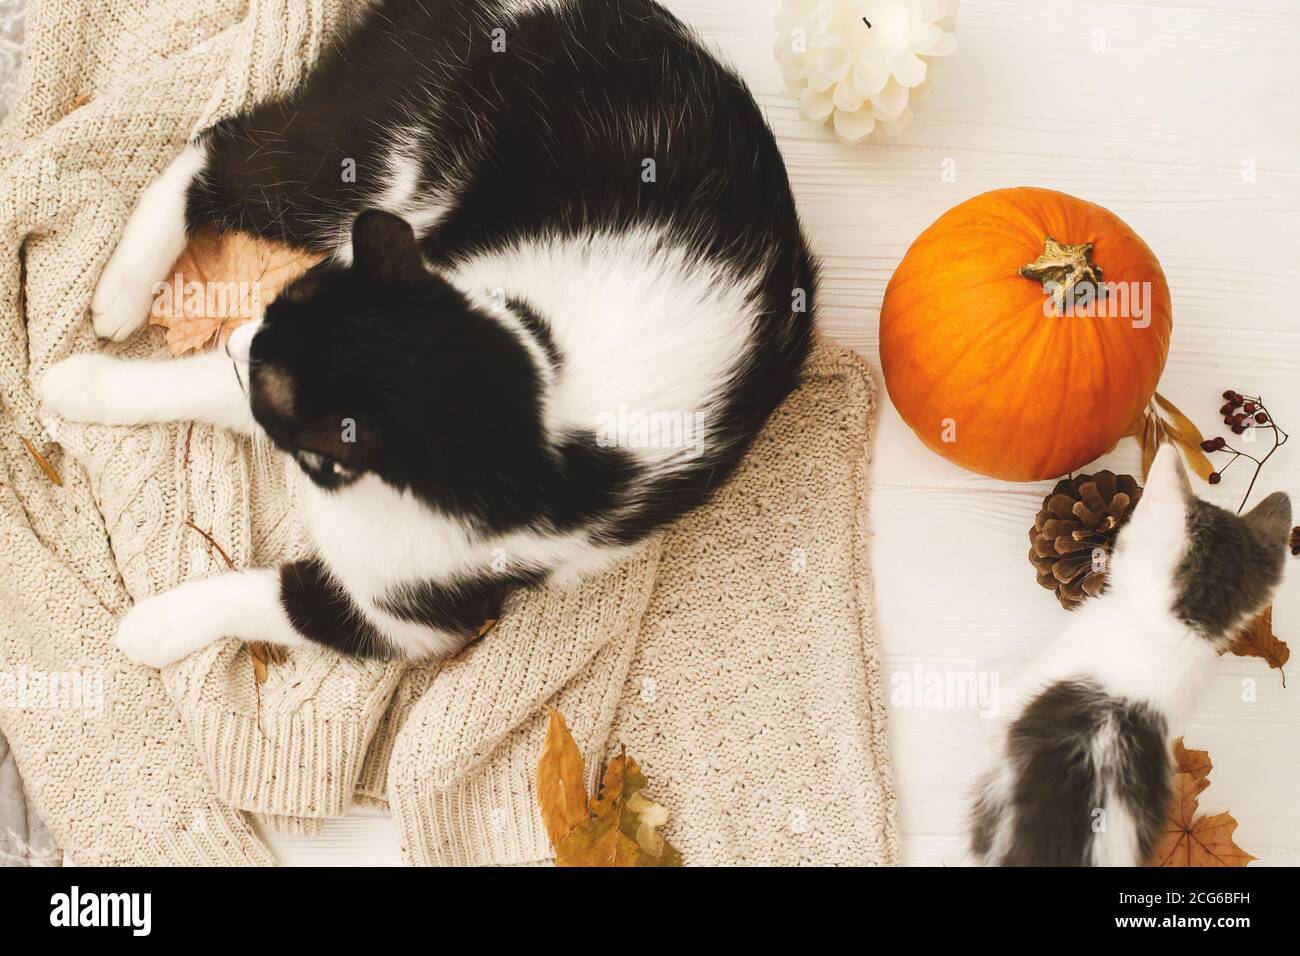 Happy Thanksgiving! Cute cat and little kitten relaxing on warm knitted  sweater with pumpkin, autumn leaves, cone and acorns. Cozy fall image Stock  Photo - Alamy